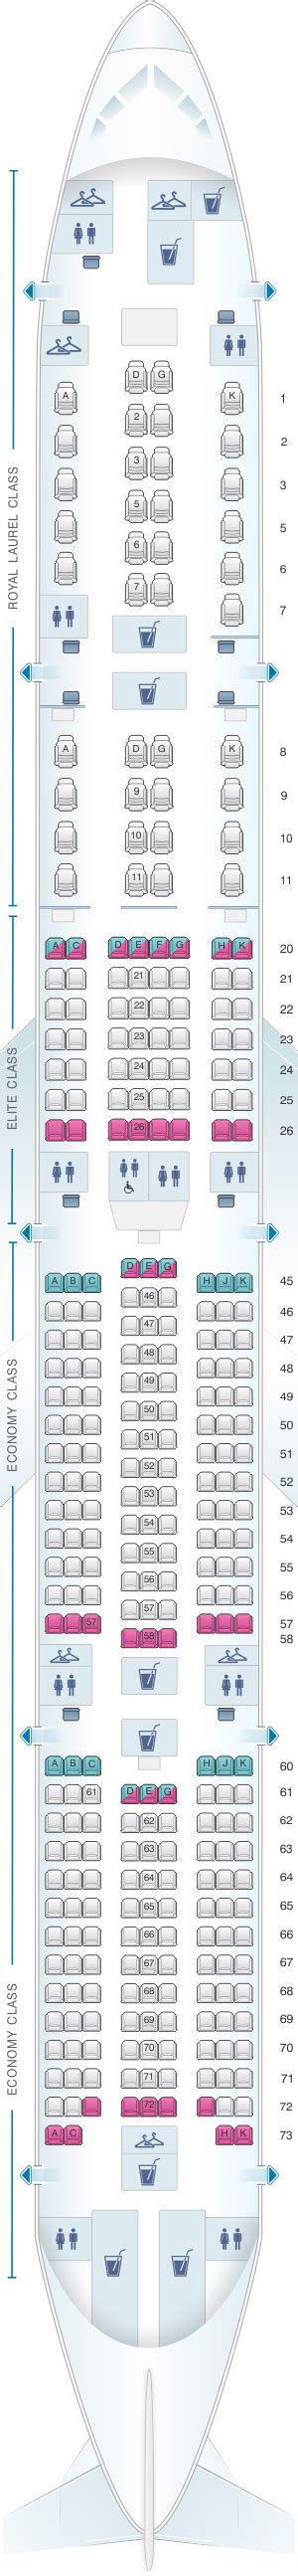 Seat map eva air 777 - In Economy Class on EVA Air's 777-300ER and A330-200/300s, the shape-memory cushion material and ergonomic design make the seats superbly comfortable and the bottom cushion moves forward as the seat reclines to give a more natural reclining position. But the innovation doesn’t stop there—a fully adjustable headrest ensures that your head ... 